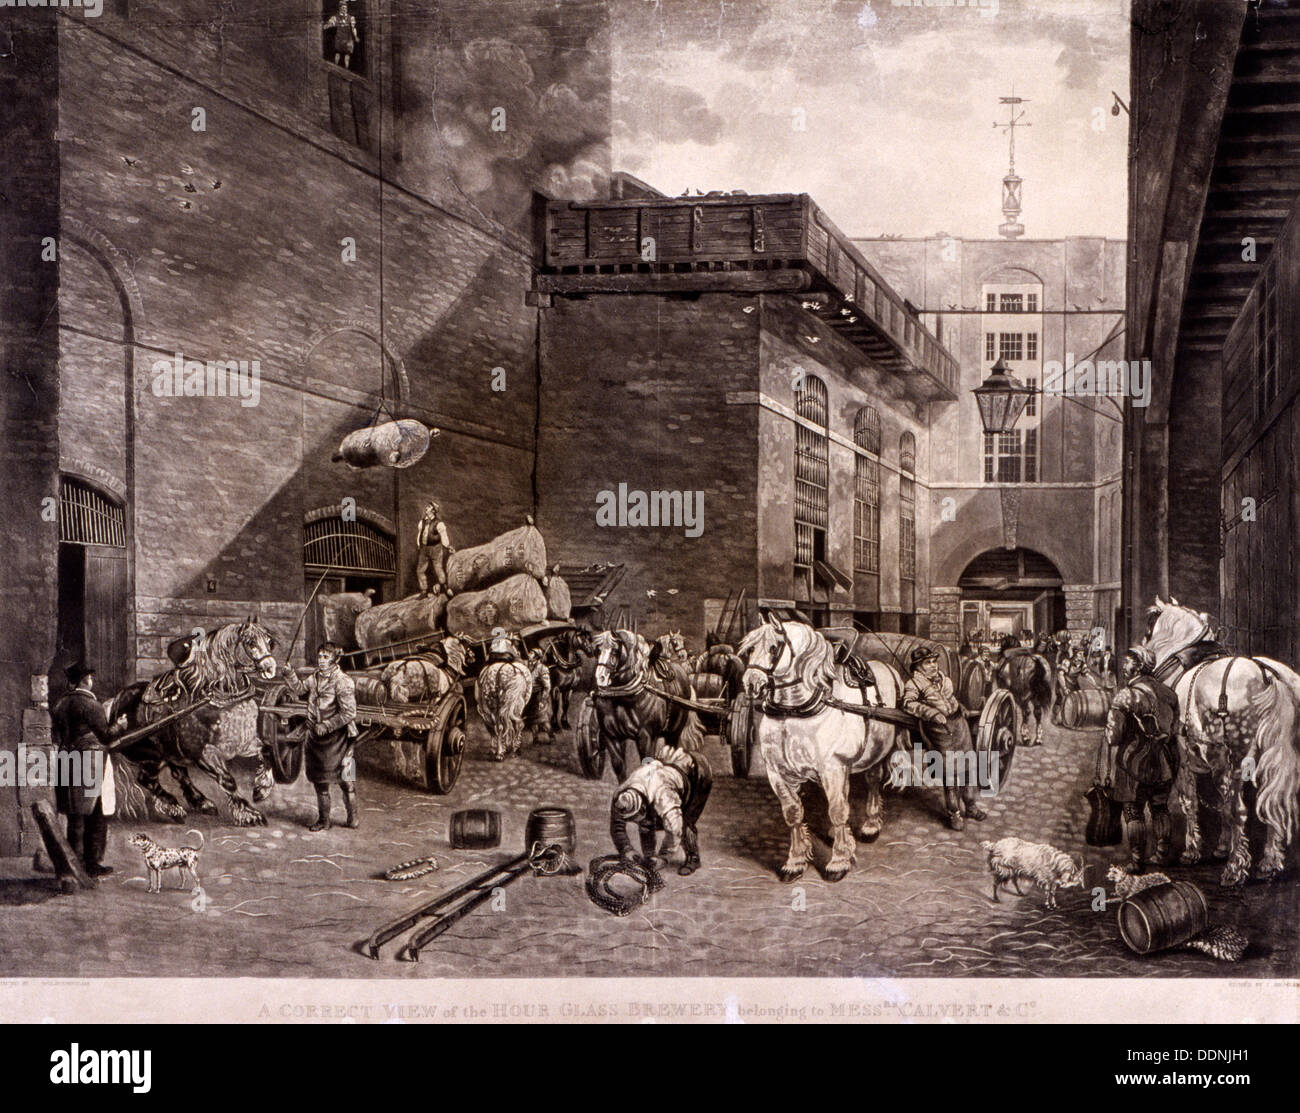 The Hour Glass Brewery on Upper Thames Street, London, 1821.  Artist: J Bromley Stock Photo